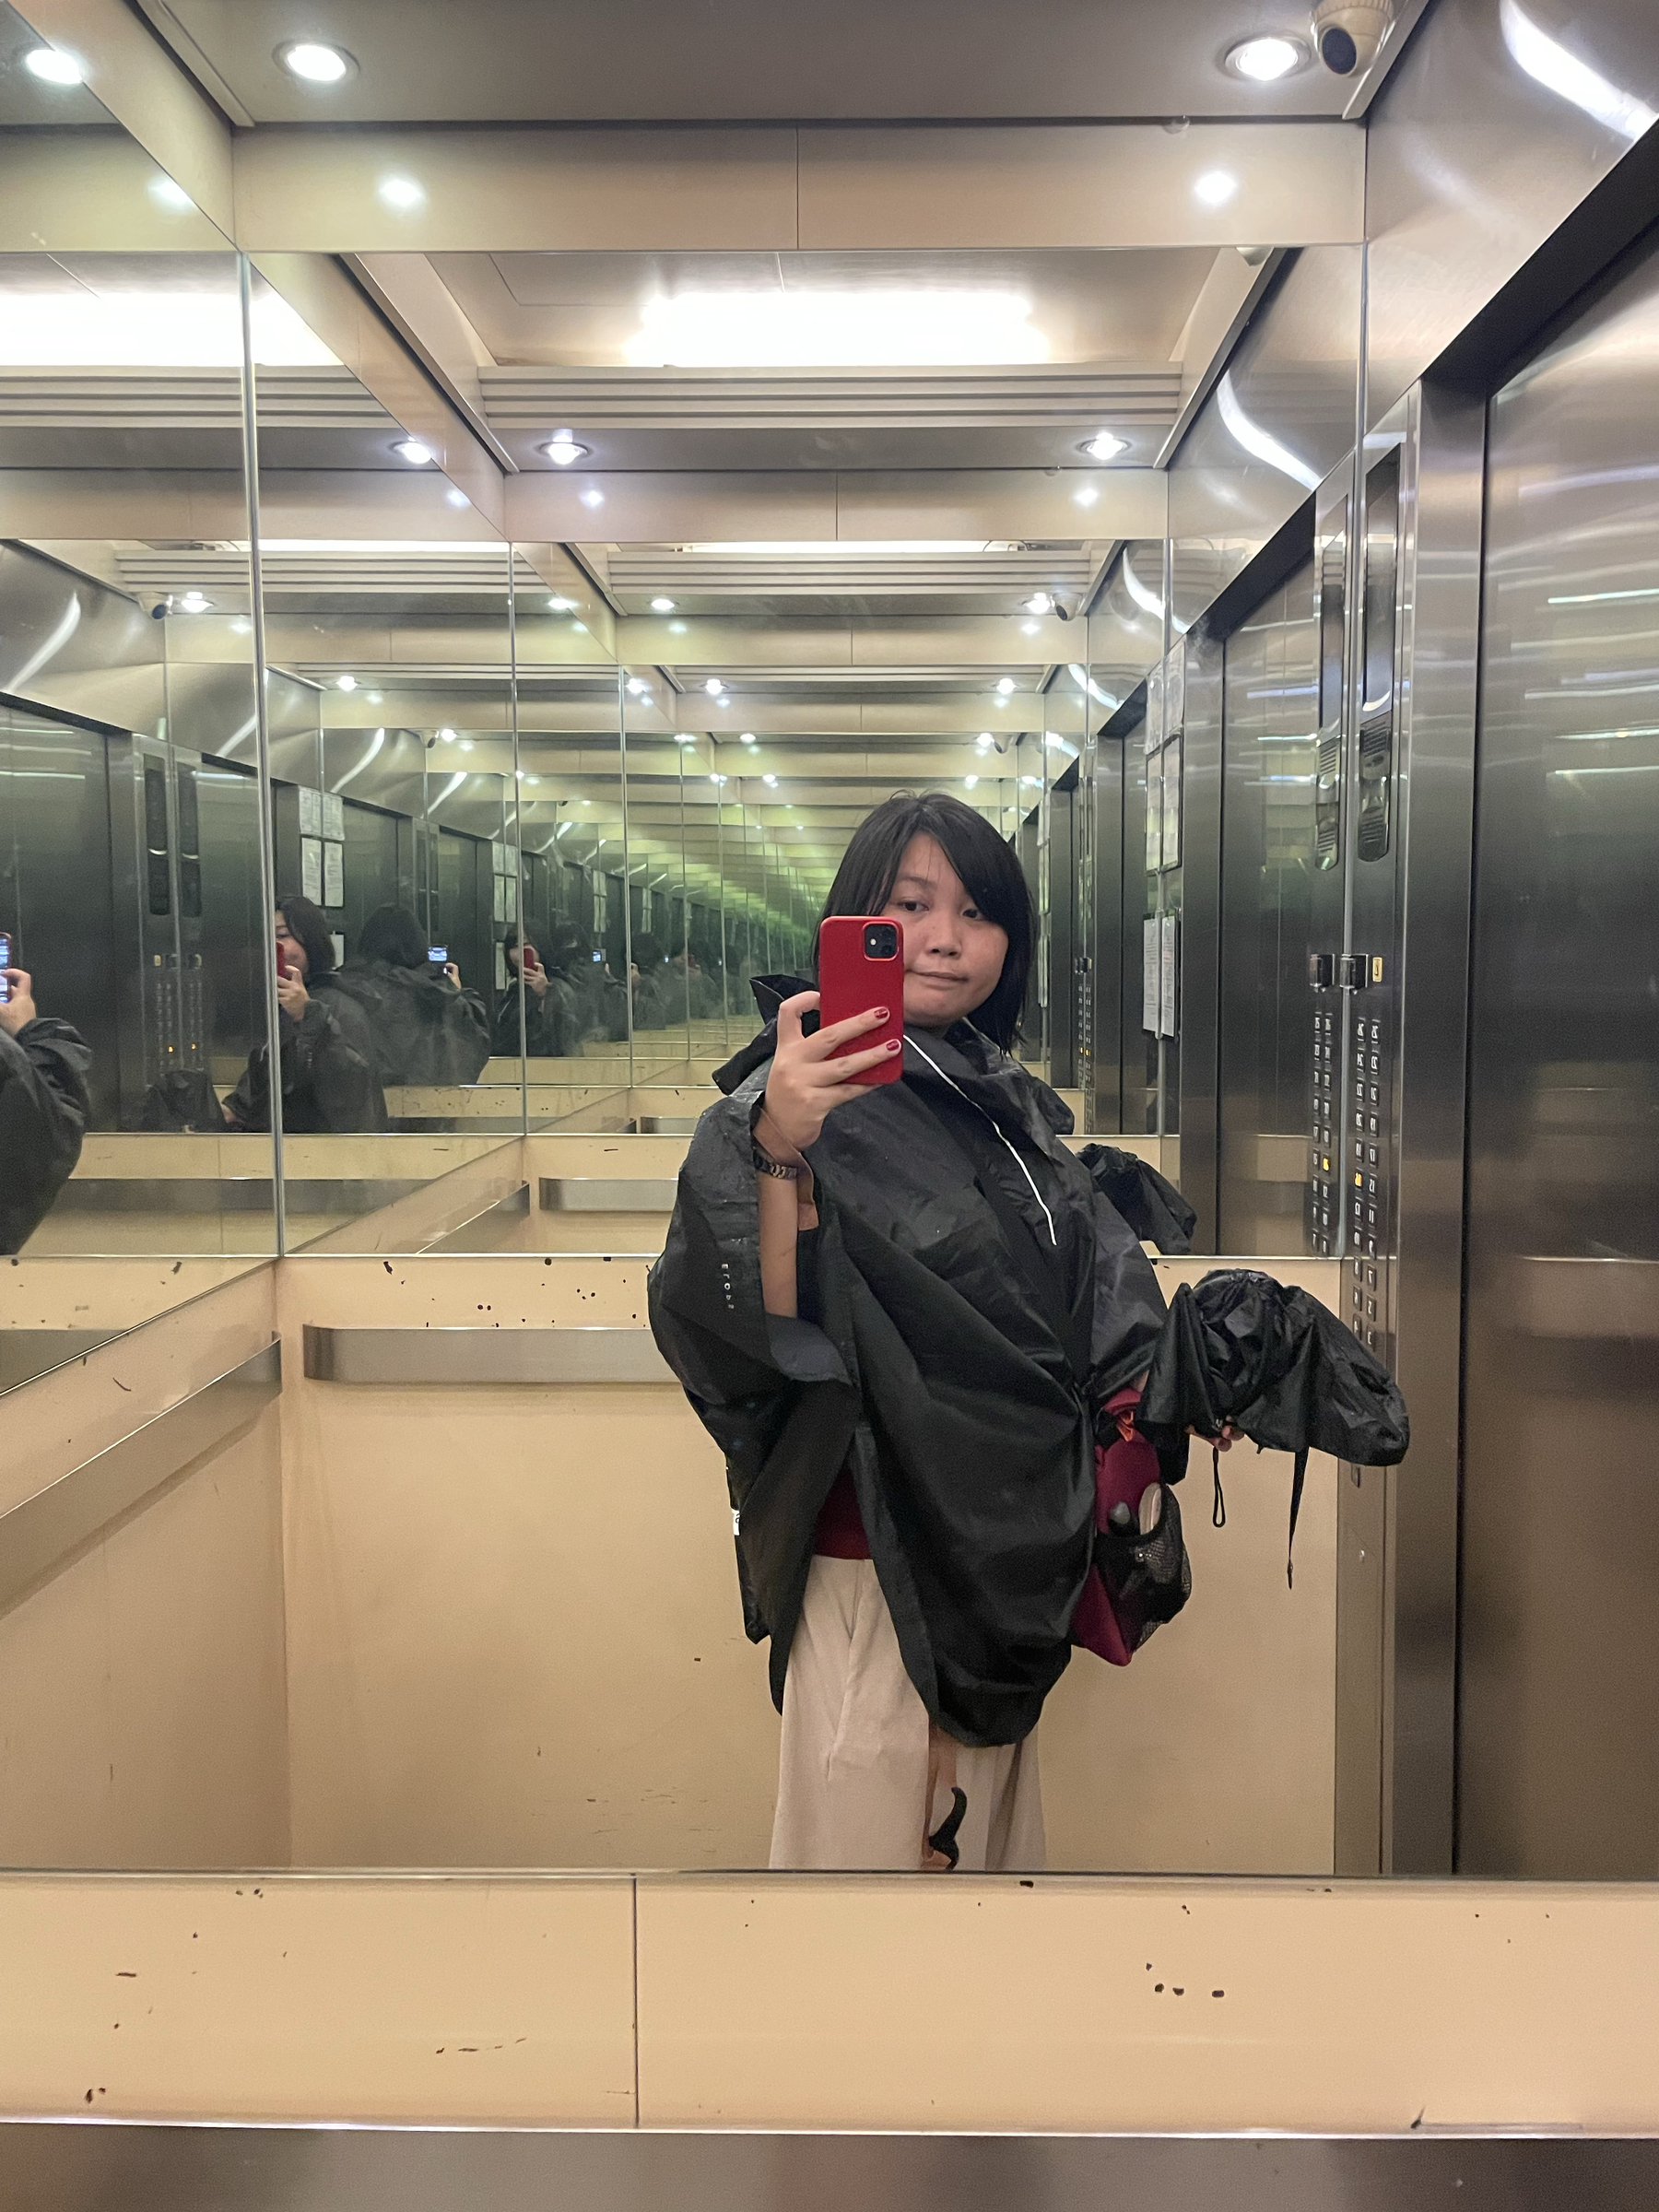 mirror photo of Chi in their condominium’s elevator. She is seen wearing her bike poncho over her work clothes. Her bike bag is in sling mode and set to her left, and in her left hand she is also seen holding a wet folded umbrella.